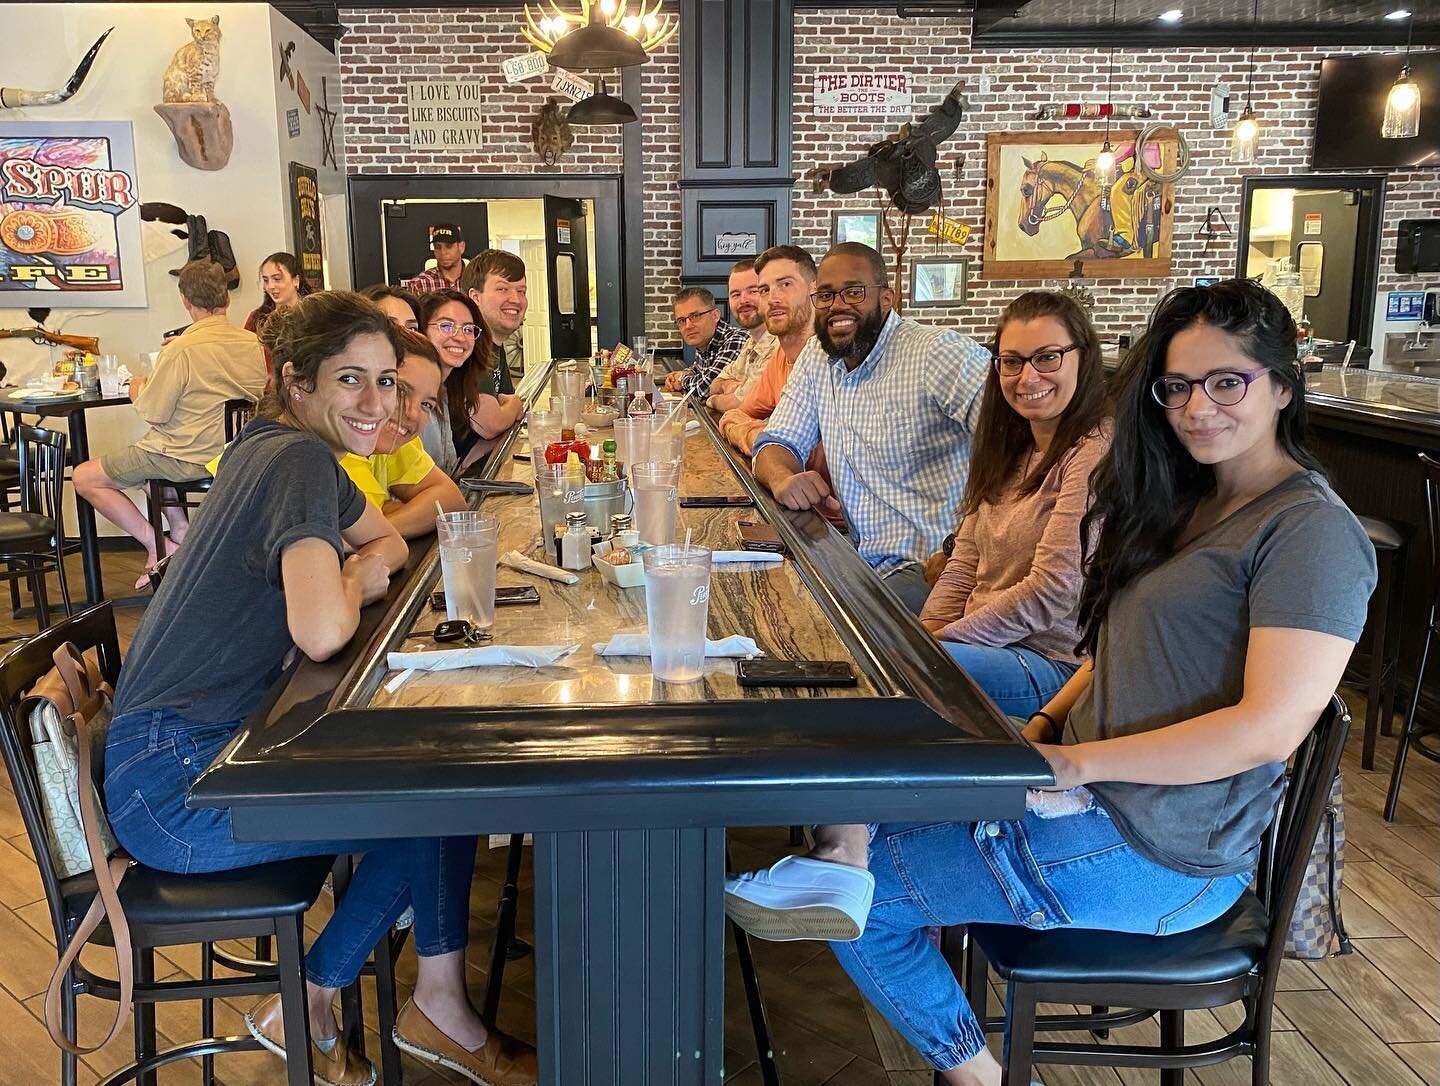 Fridays are the perfect day for team lunches! ☀️

#crossarchitects #teamlunch #multifamilyinspo #multifamily #interiordesign #dfw #allen #companyculture #funfriday #tgif #teamwork